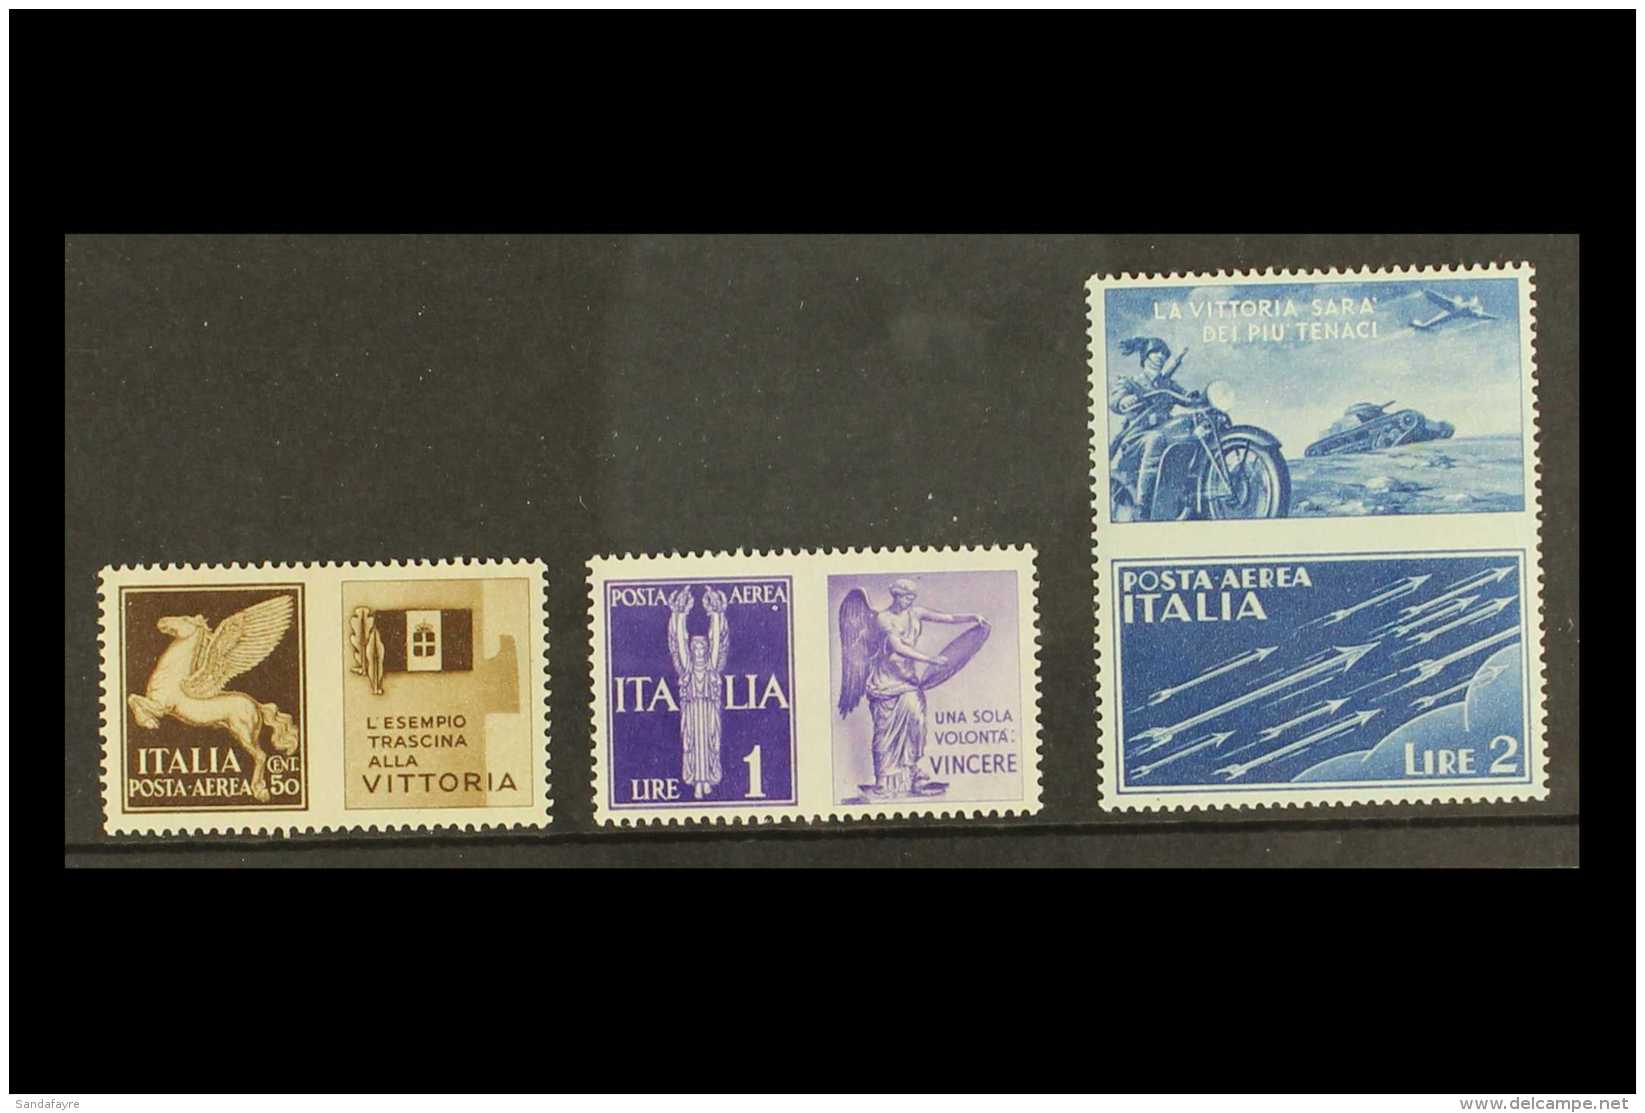 WWII - WAR PROPAGANDA STAMPS ITALY - 1942 Air Post Set, Sassone S.1601, Vert Fine Never Hinged Mint. Beautiful,... - Unclassified